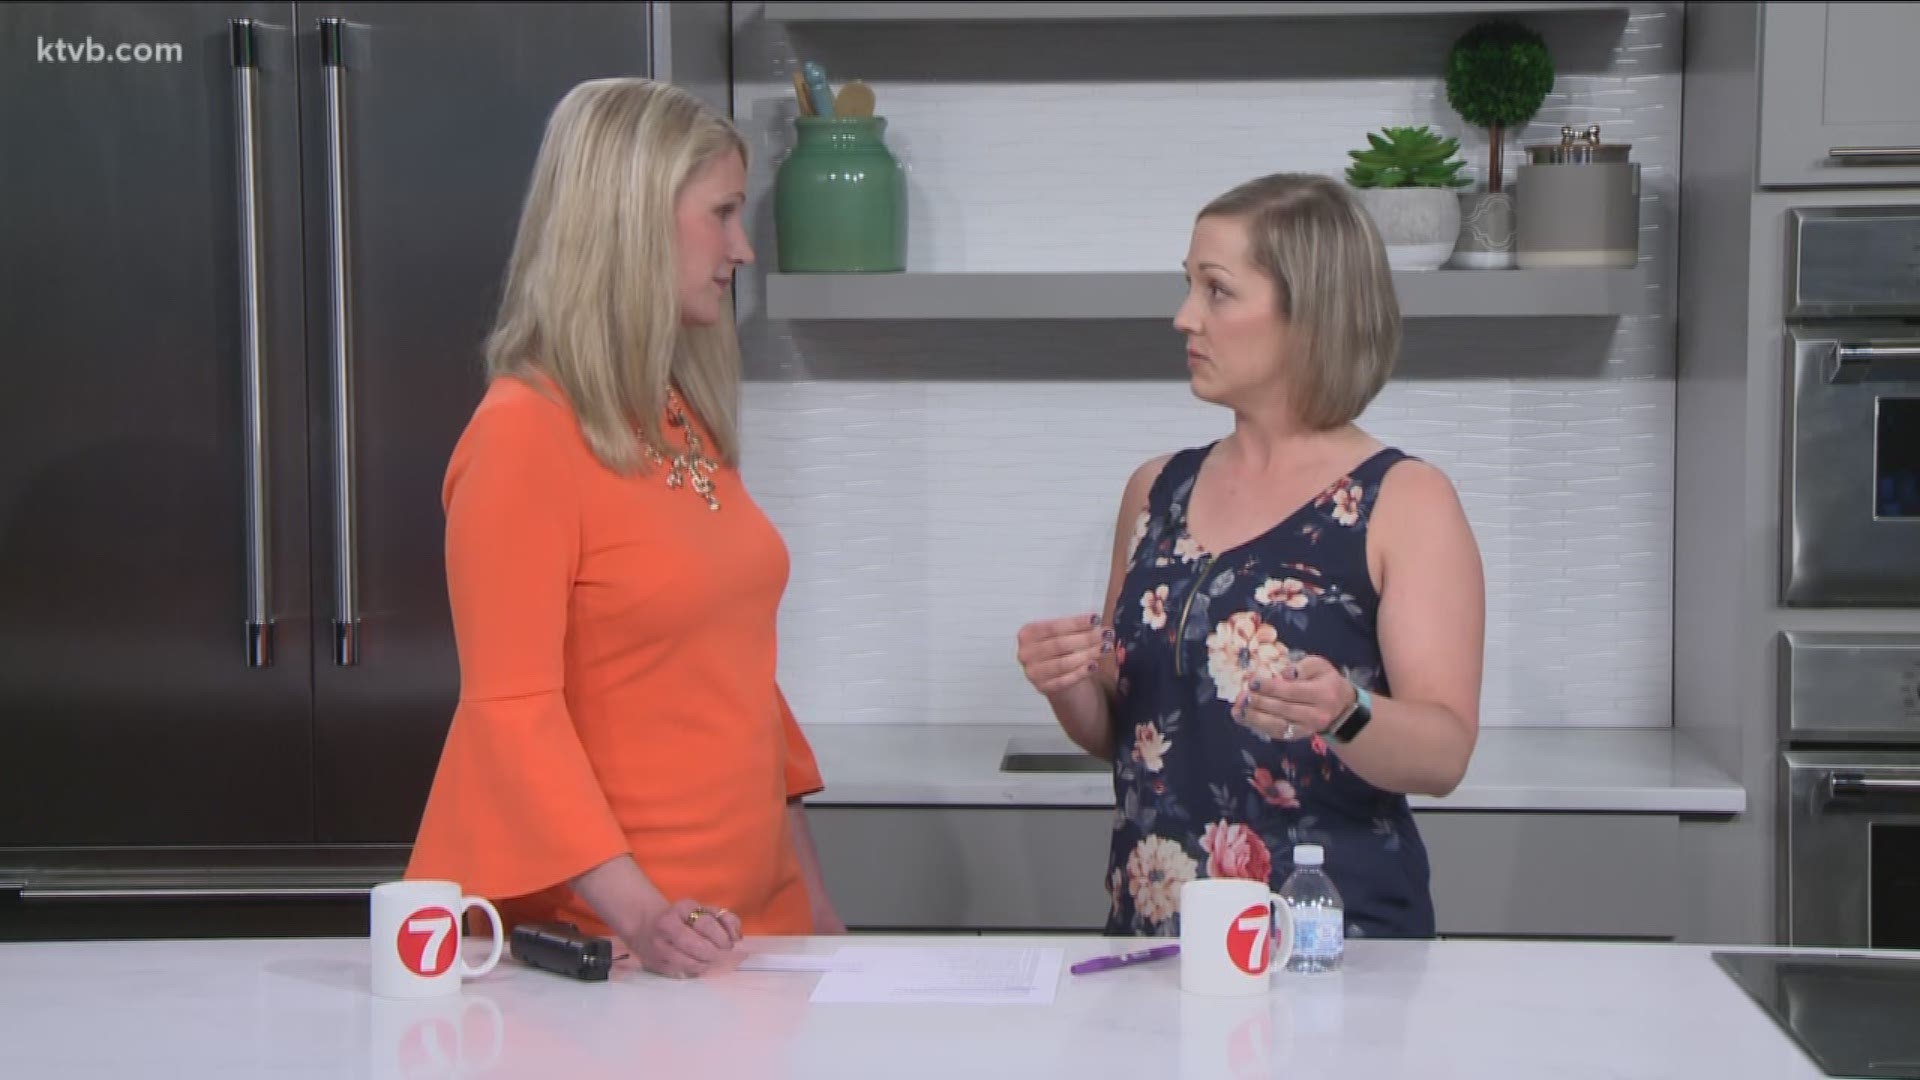 Health and Wellness coach Katie Hug details what is involved in the 28-day challenge. 